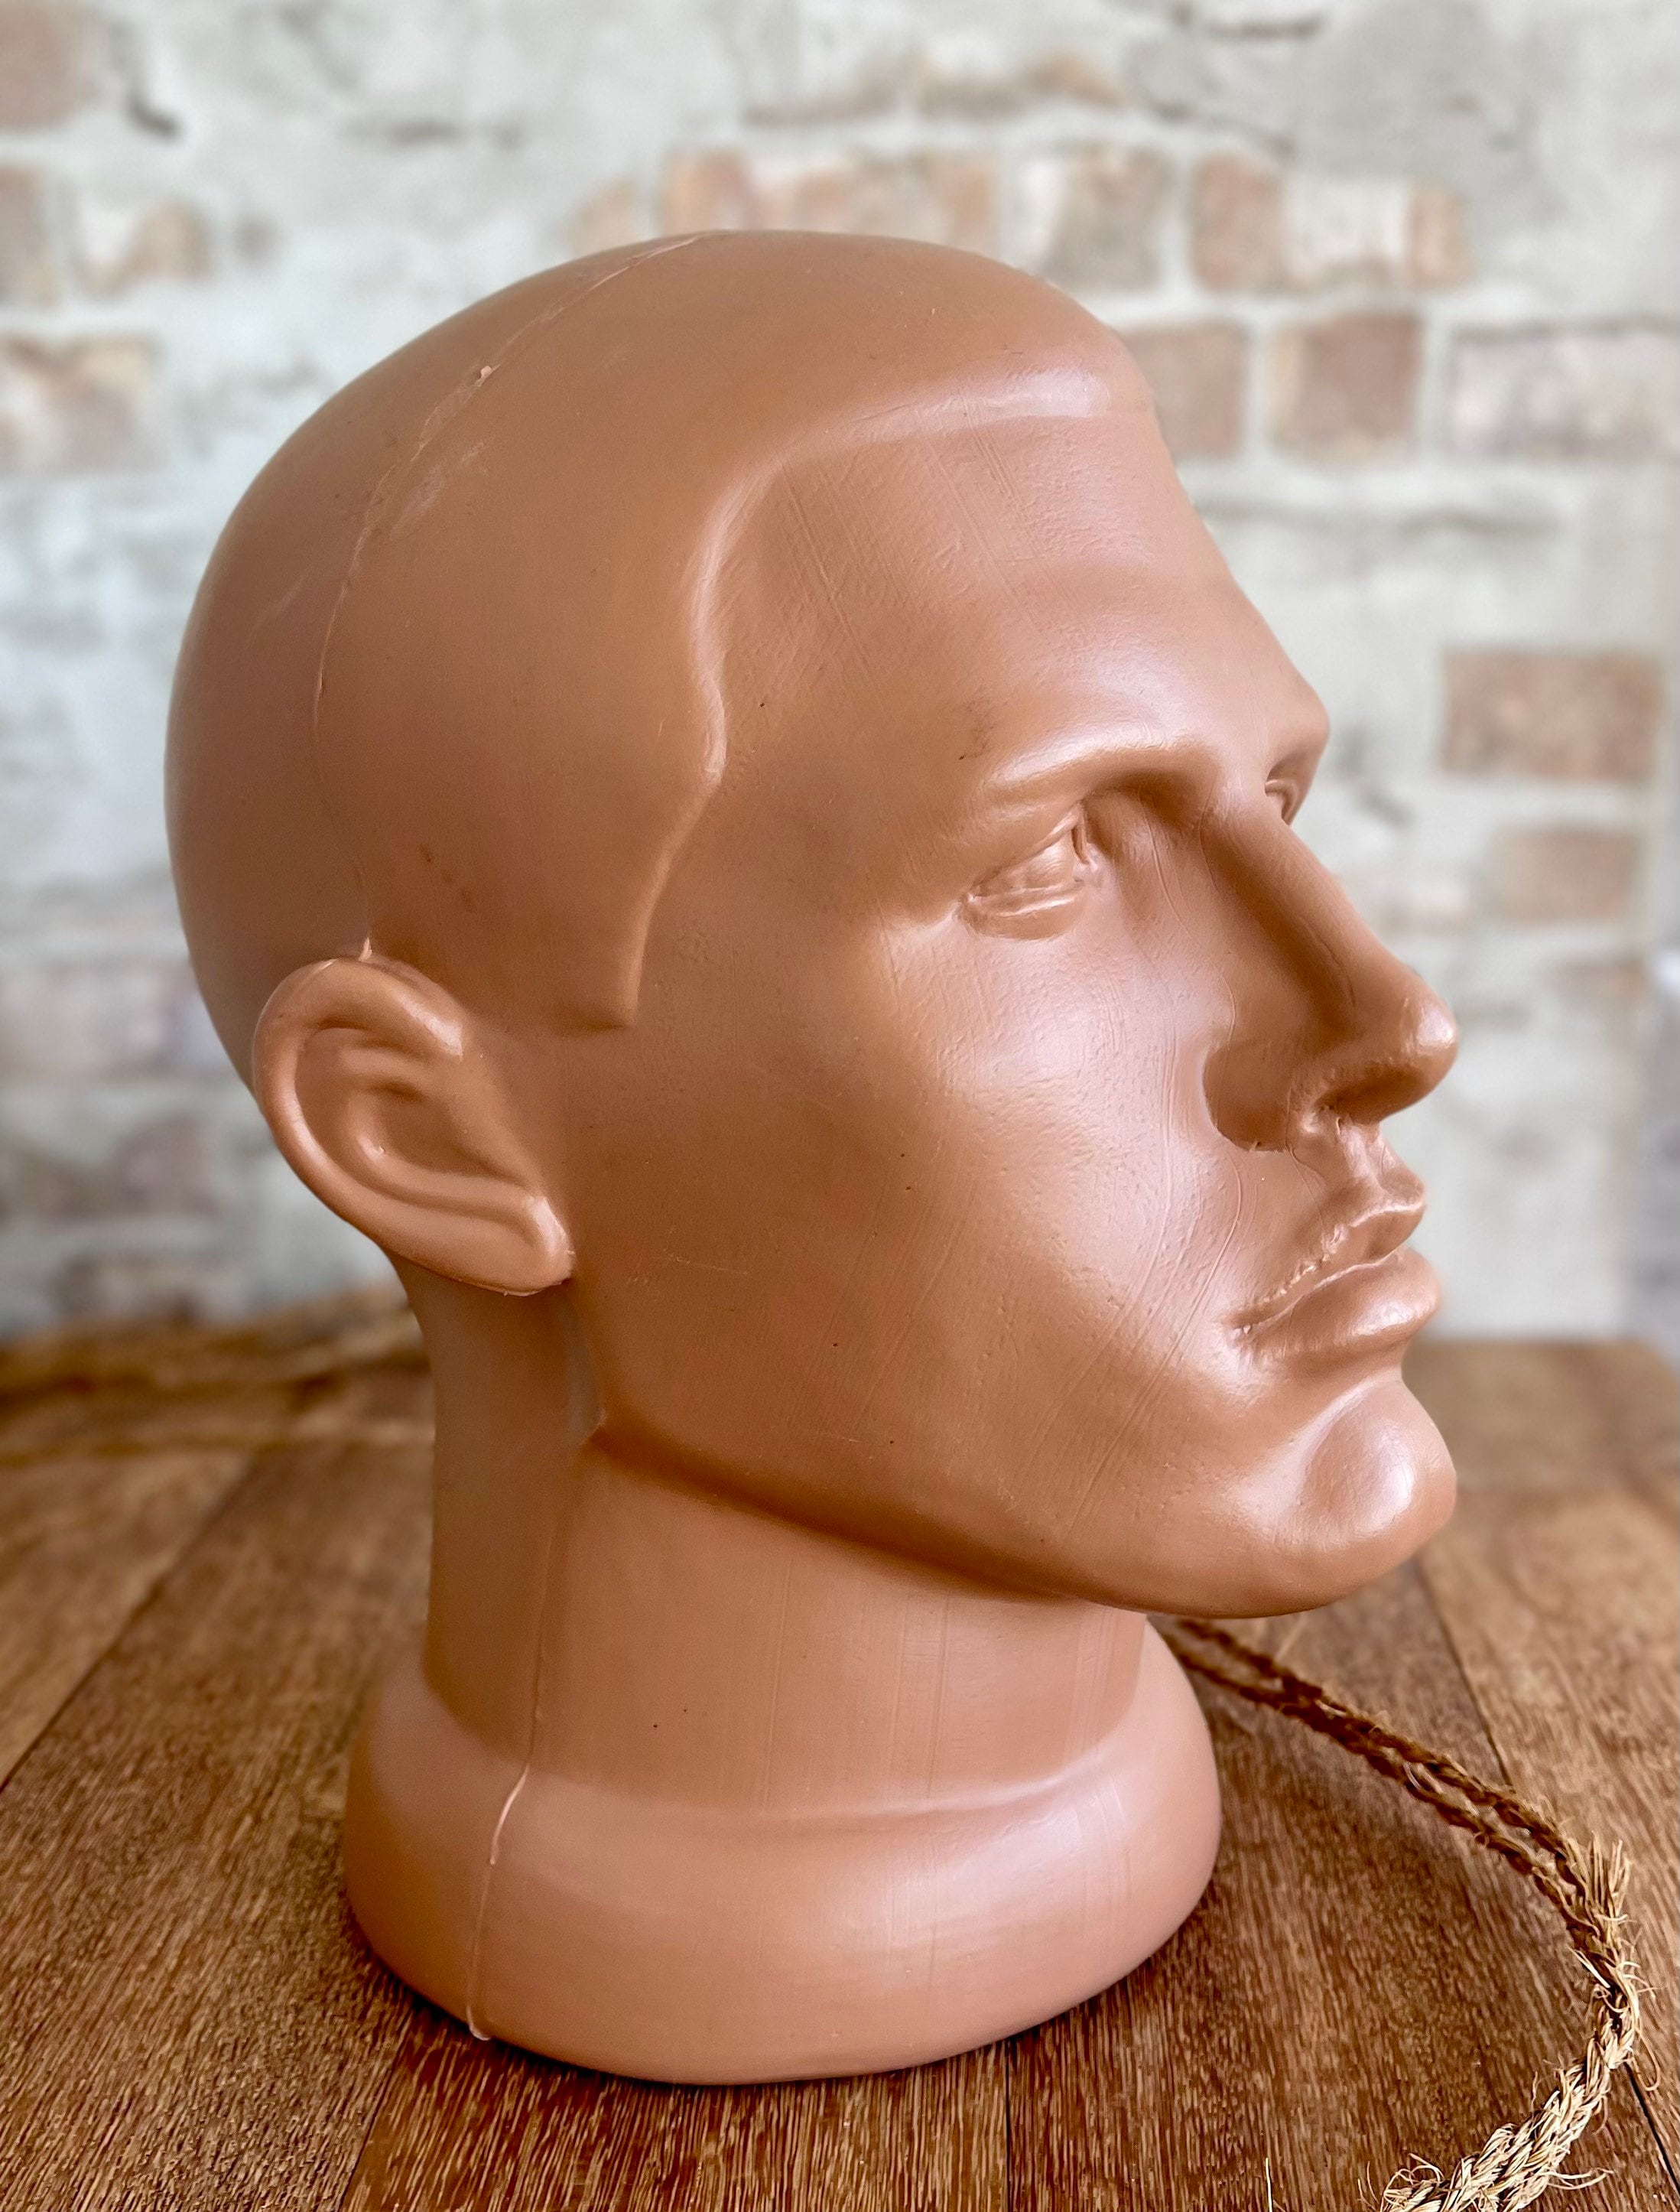 PVC Male Mannequin Head, Male Model Head Head Bust, Professional Display  Prop for Hats Jewellery Headphone Necklace Chain Stand Holder 